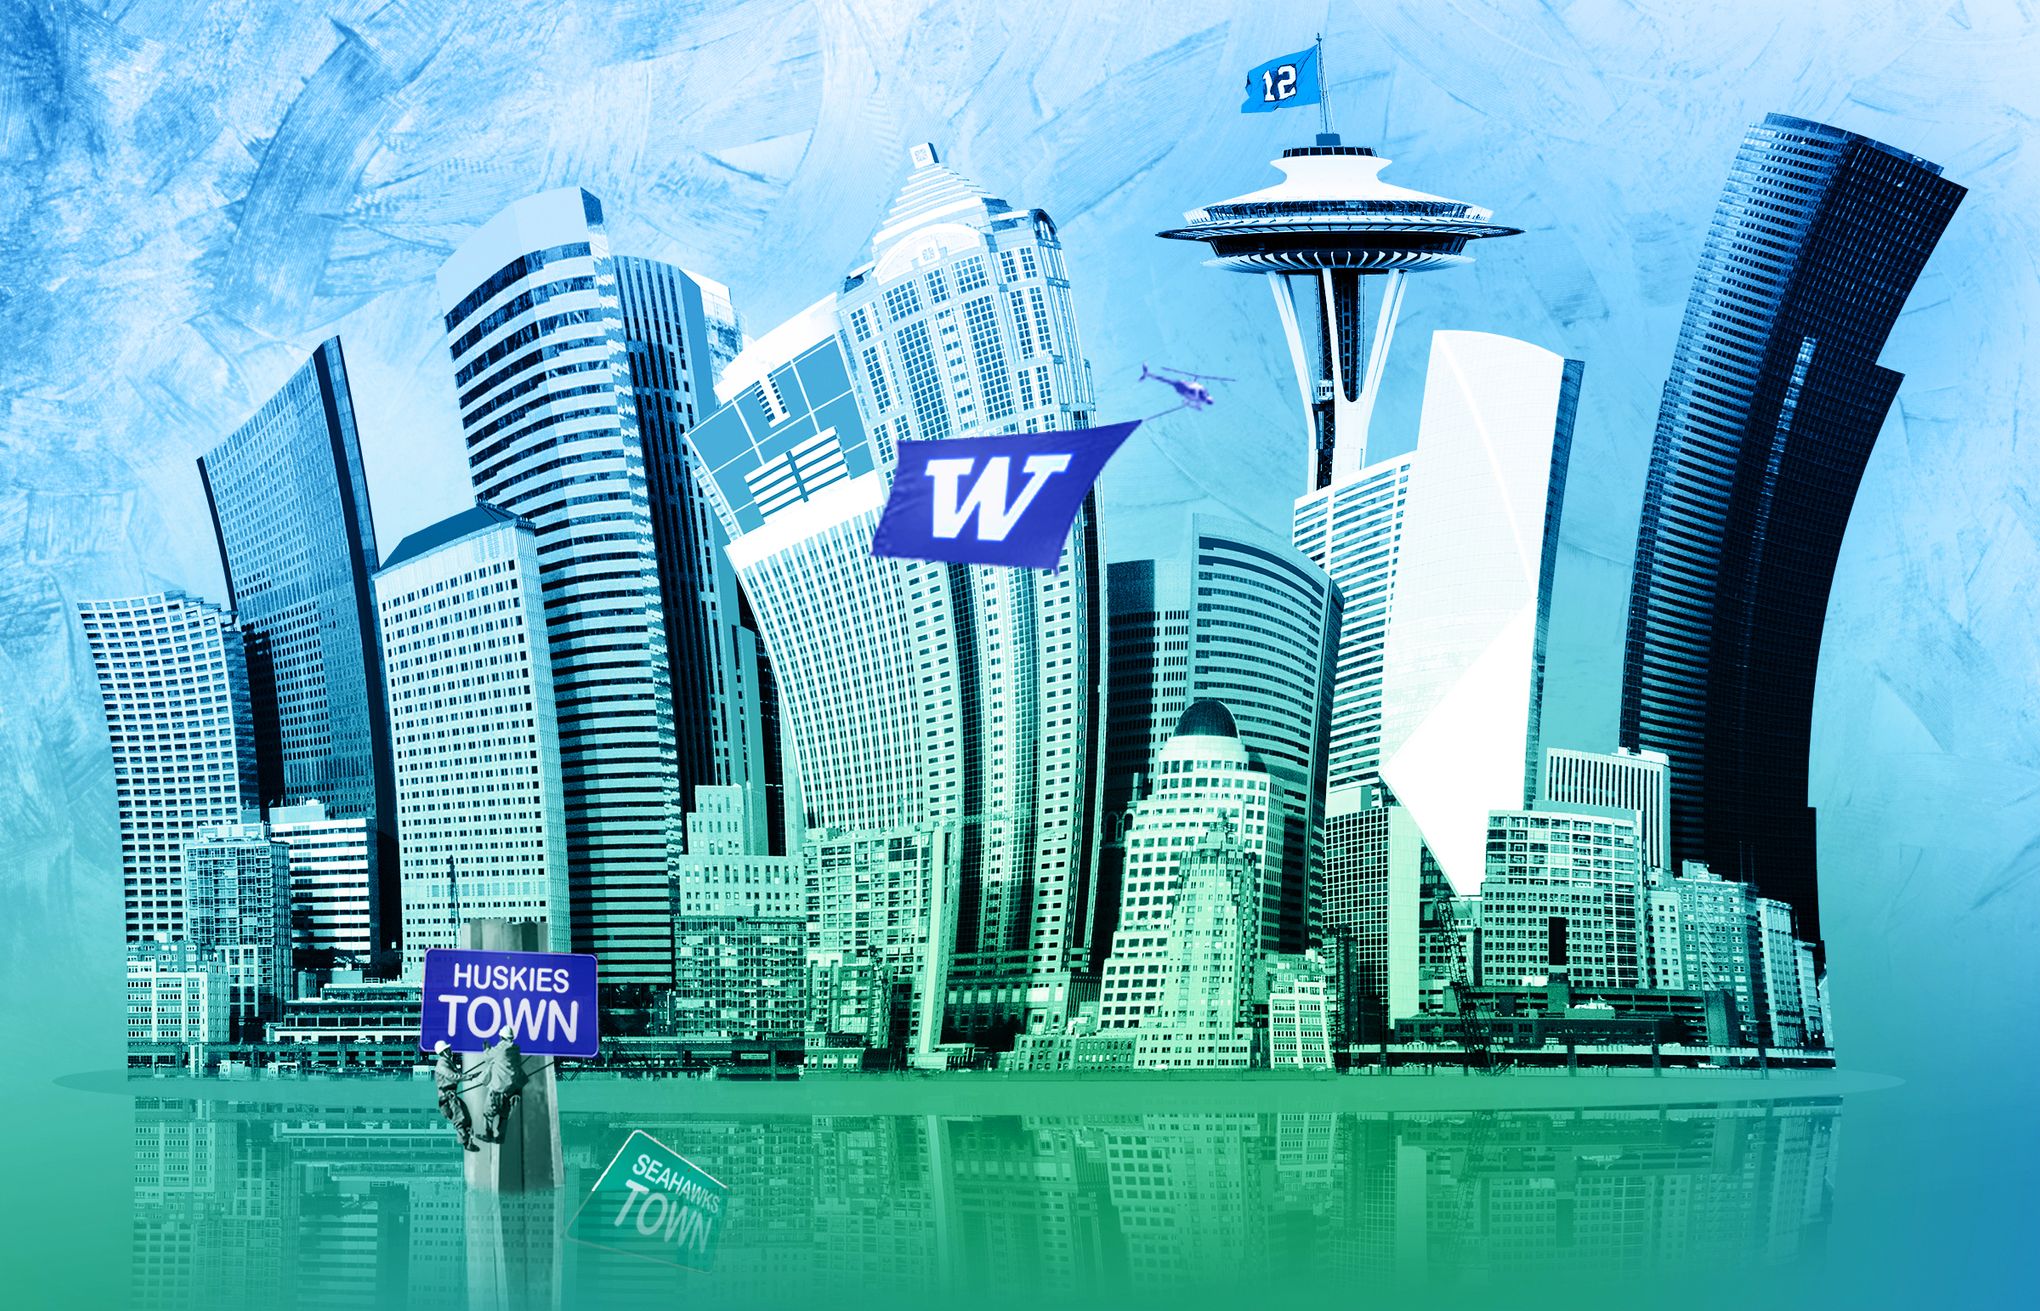 Sorry, Seahawks, your time has passed. Seattle is Husky town now.